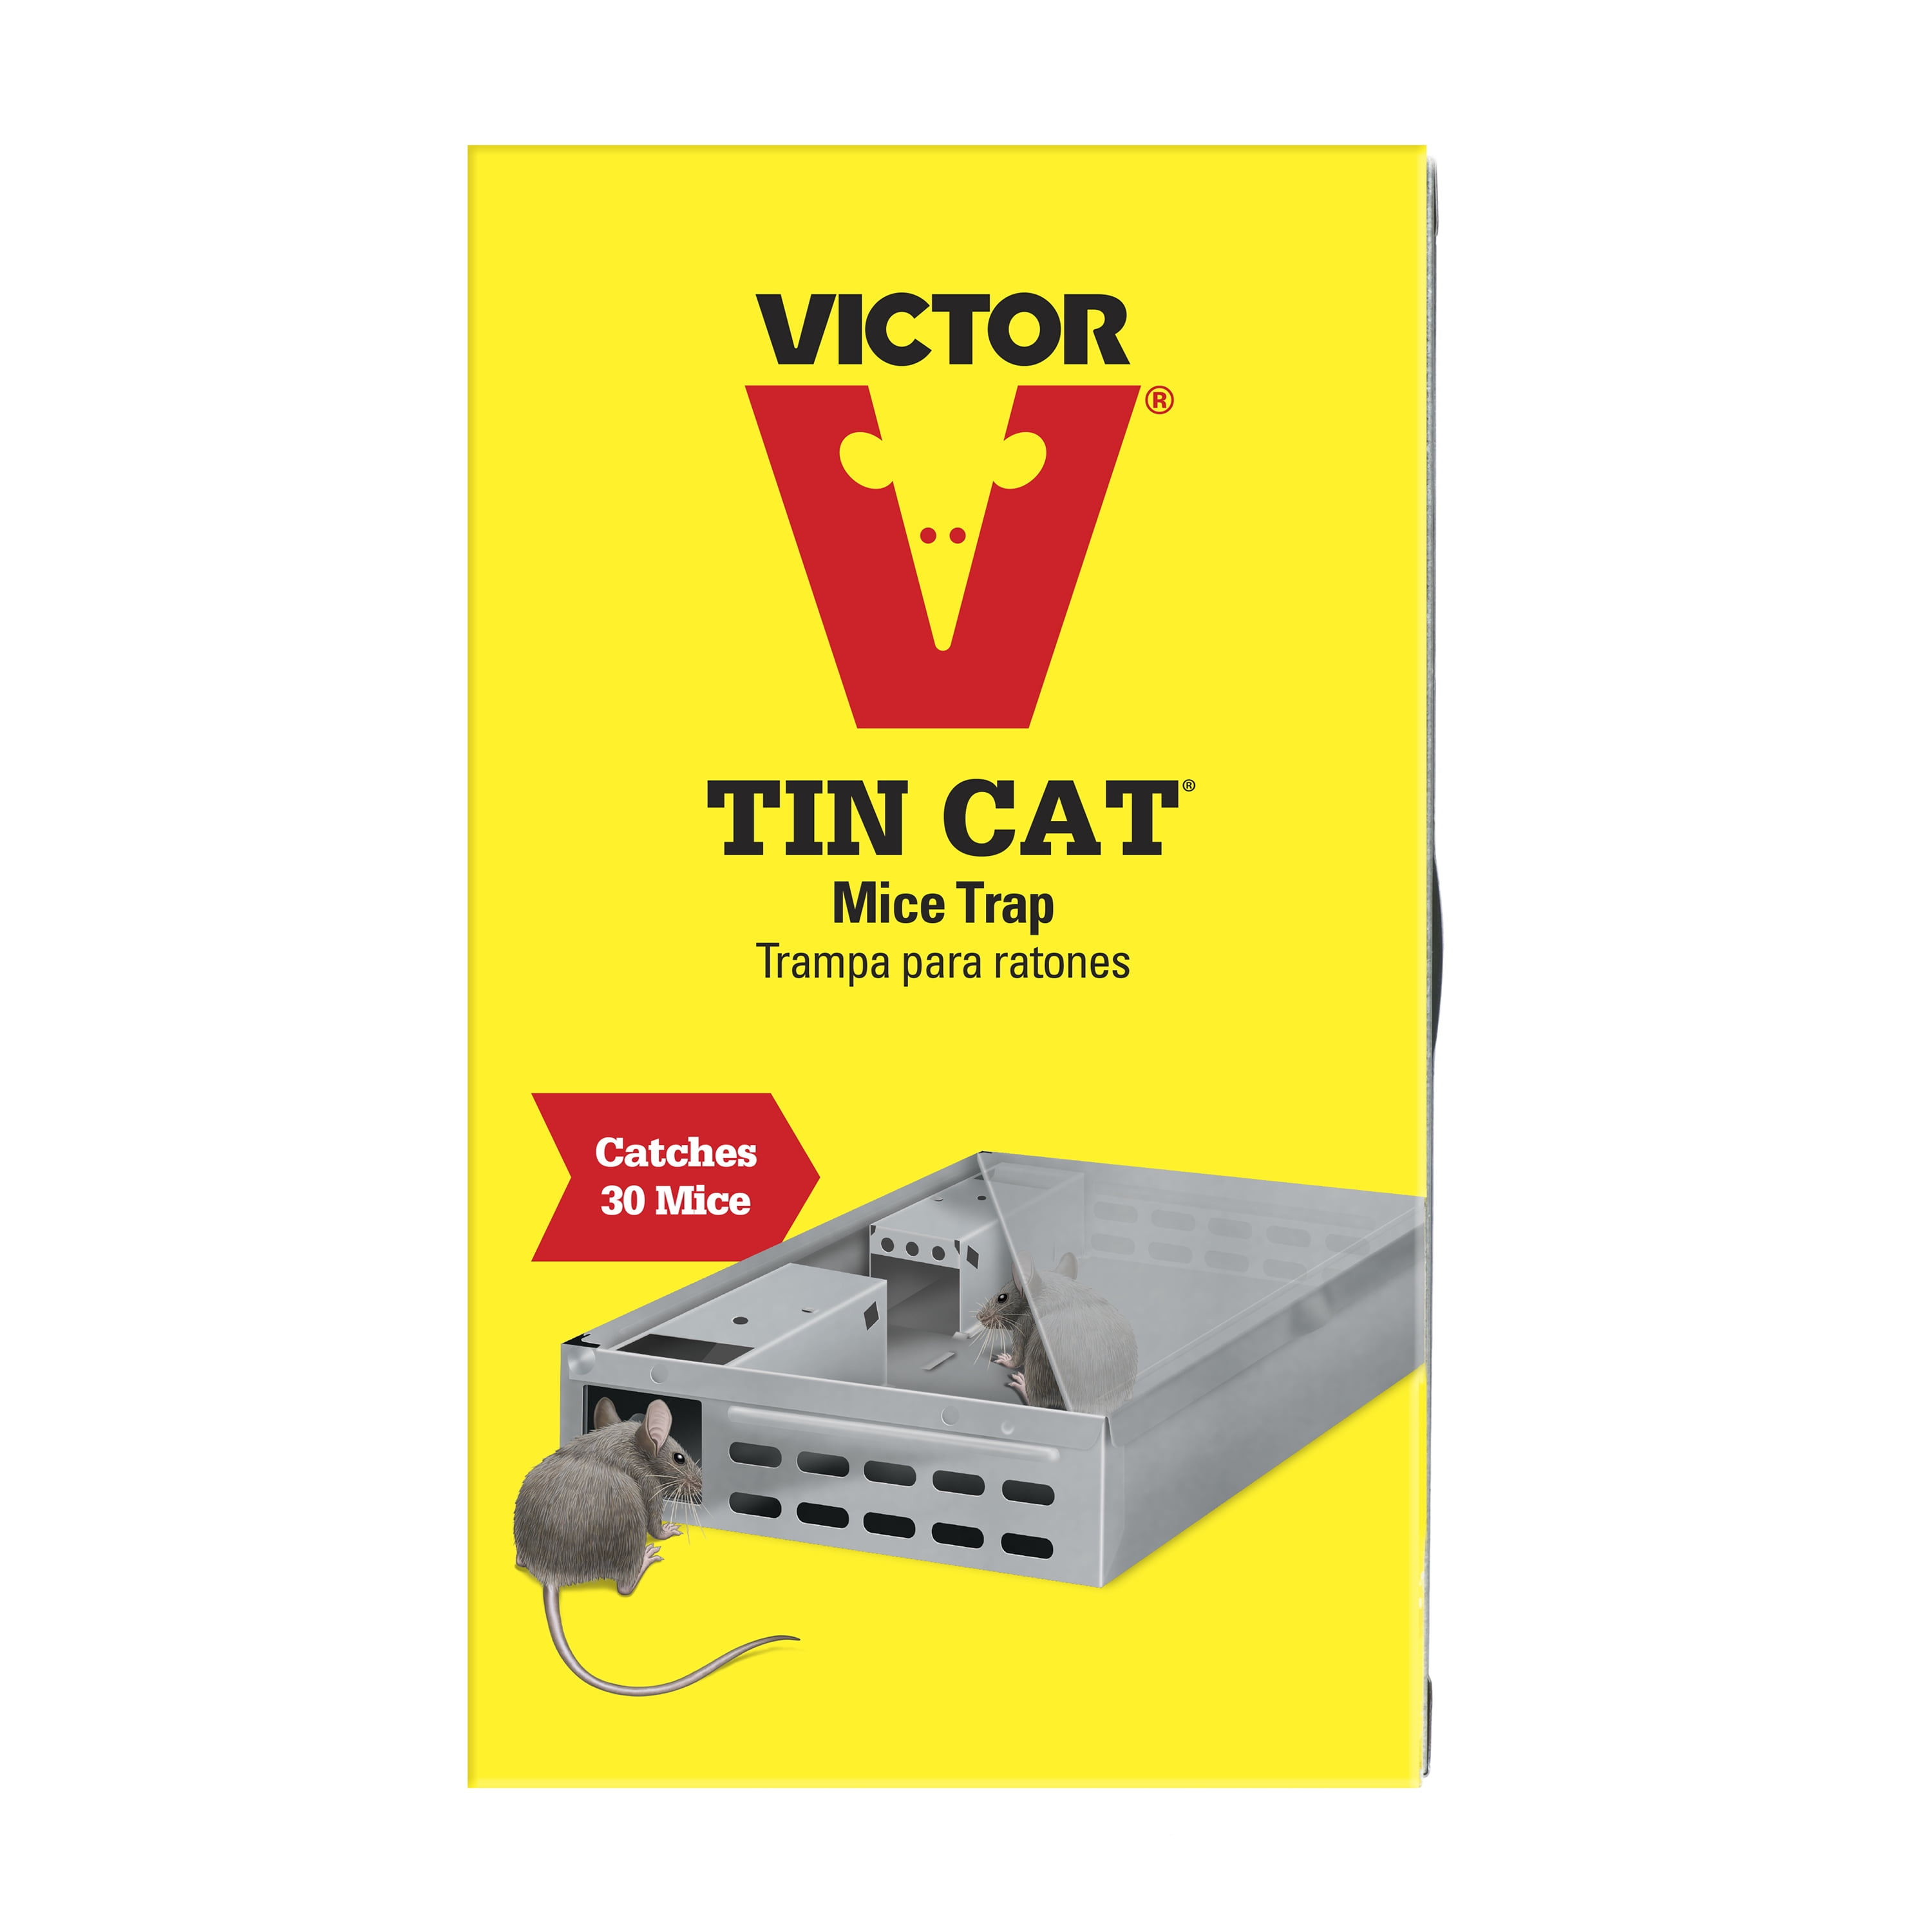 Tin Cat Repeating Mouse Trap - Jeffers